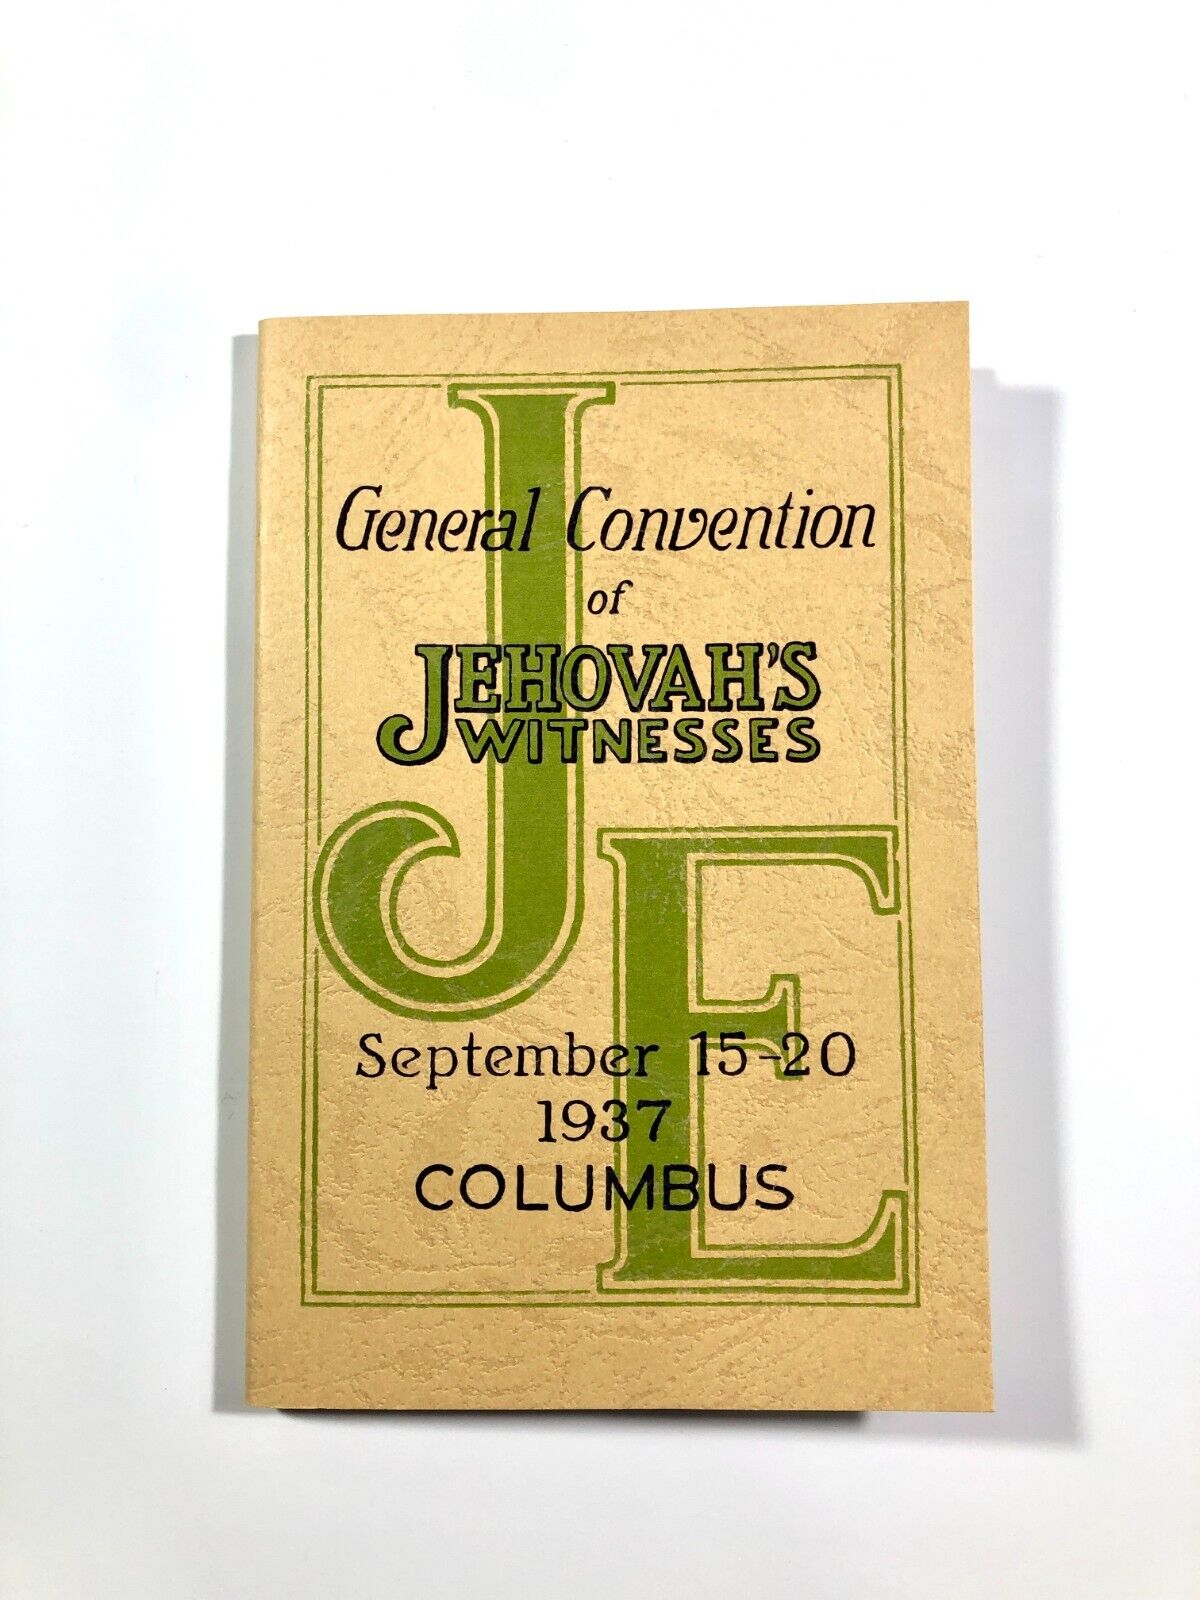 Watchtower IBSA Jehovah's Convention Program 1937 Columbus JE Perfect Repro